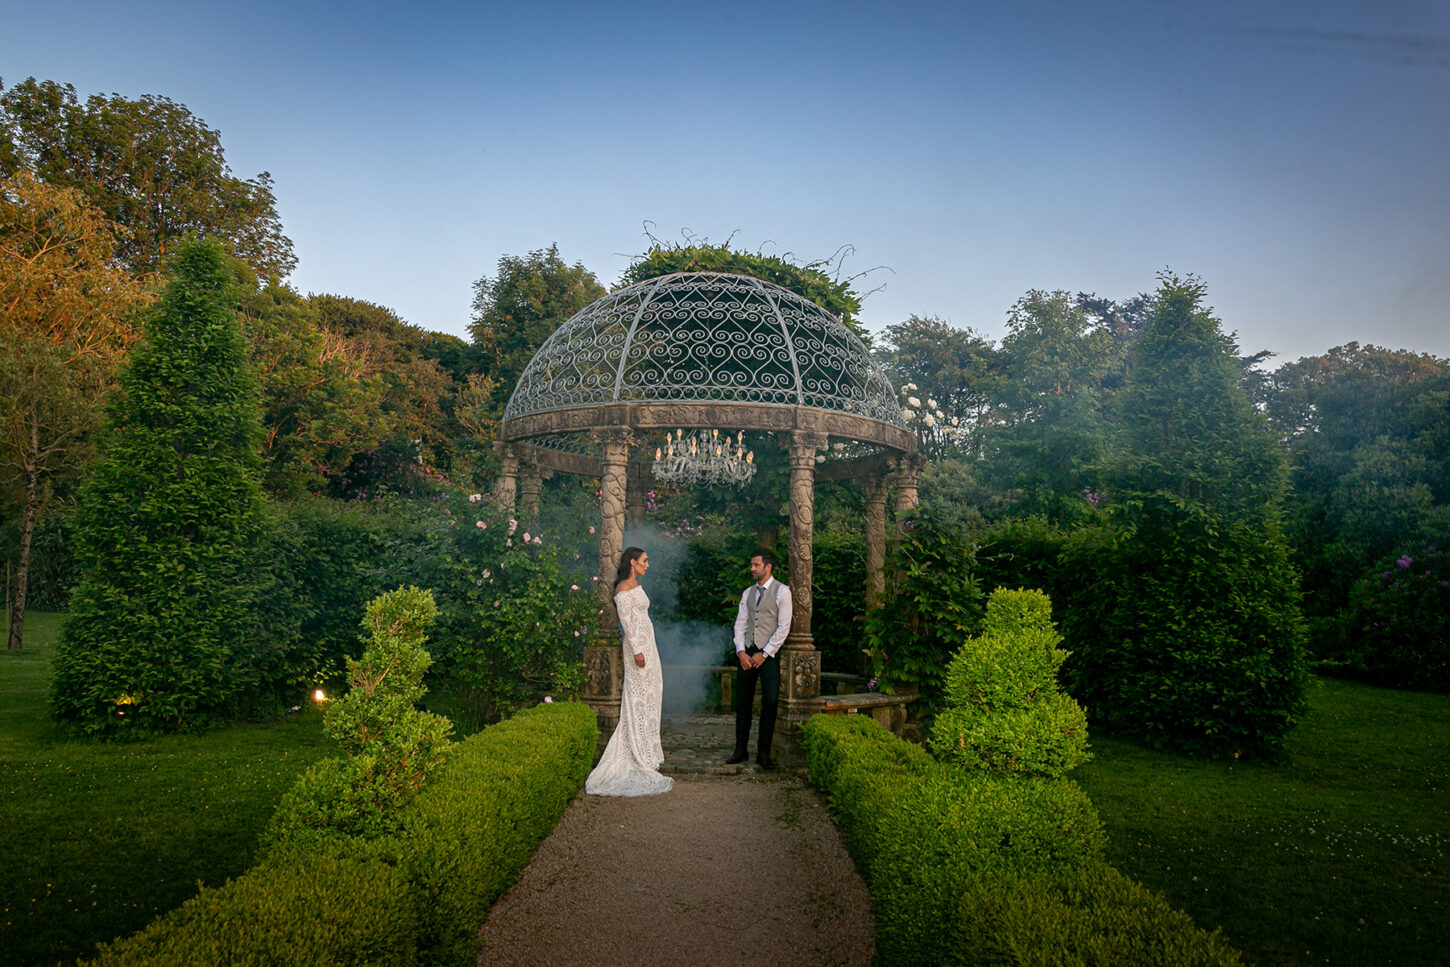 Bride and groom lean against the stone gazebo pillars at Ballyseede hotel, Tralee with lush green hedges, shrubs and trees lining the path to the gazebo and visible behind and to the side of the gazebo.